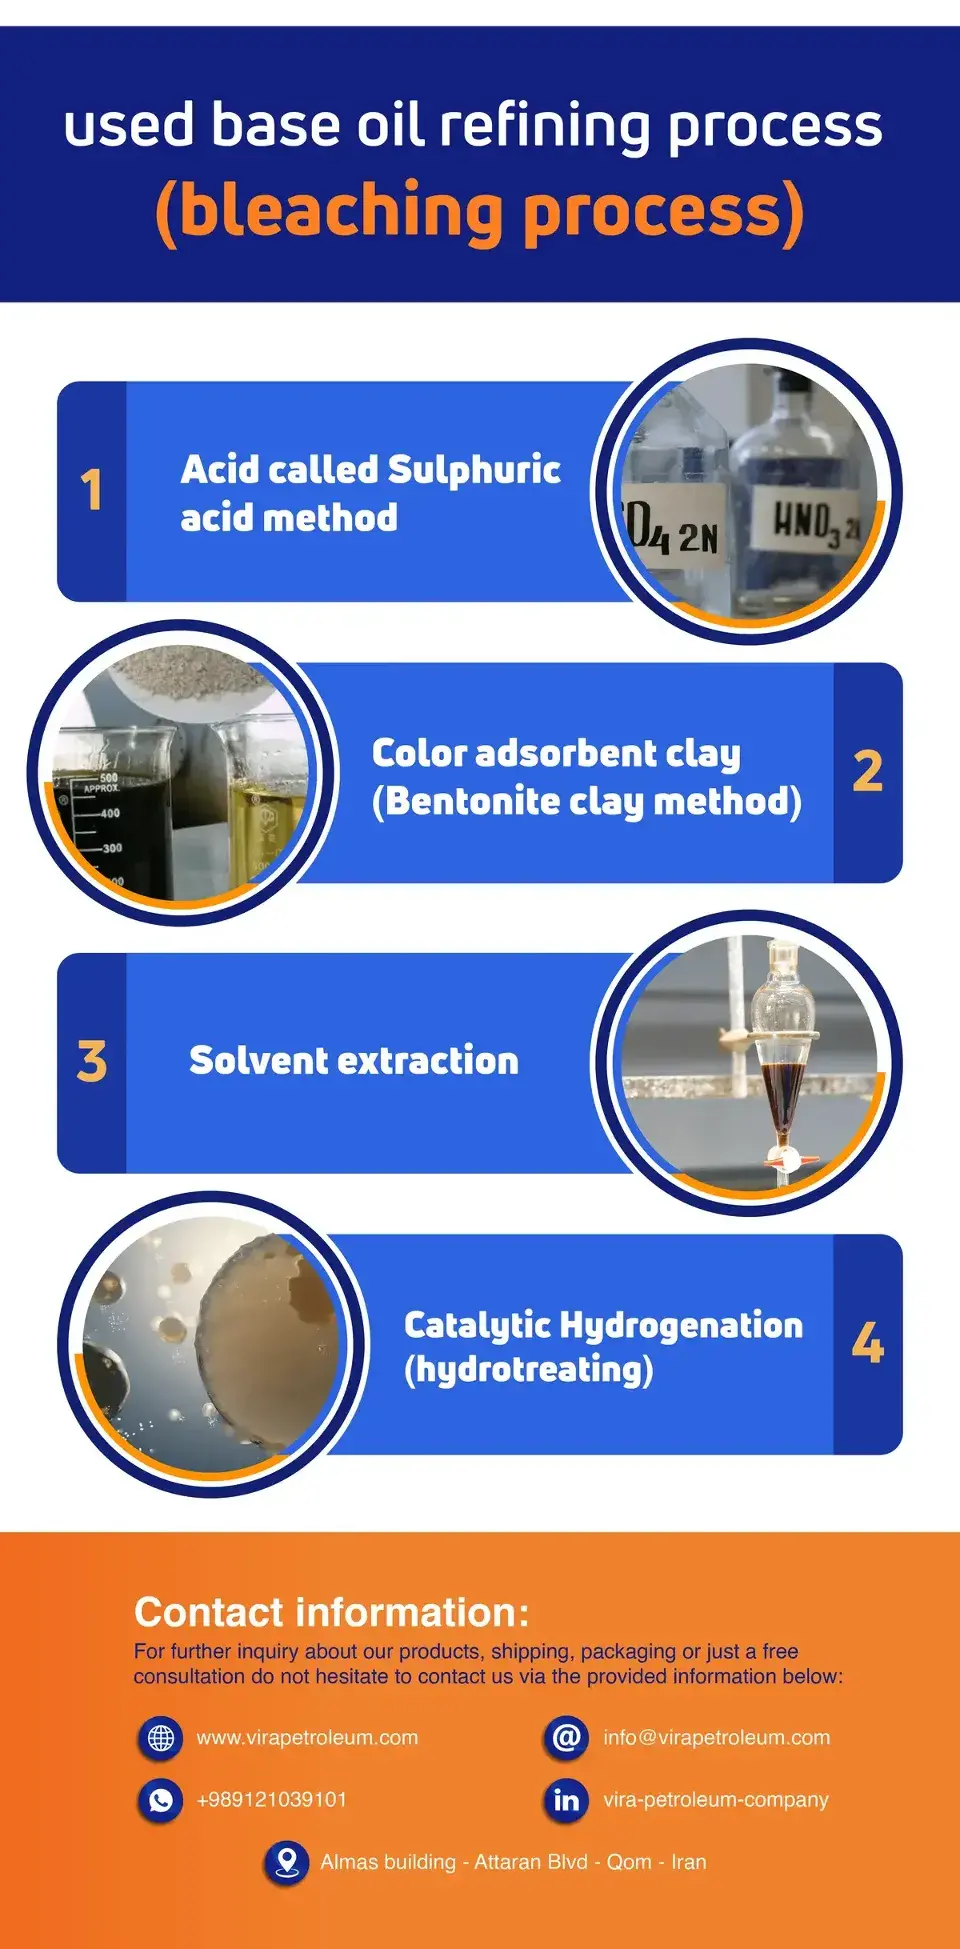 used base oil refining process (bleaching process)